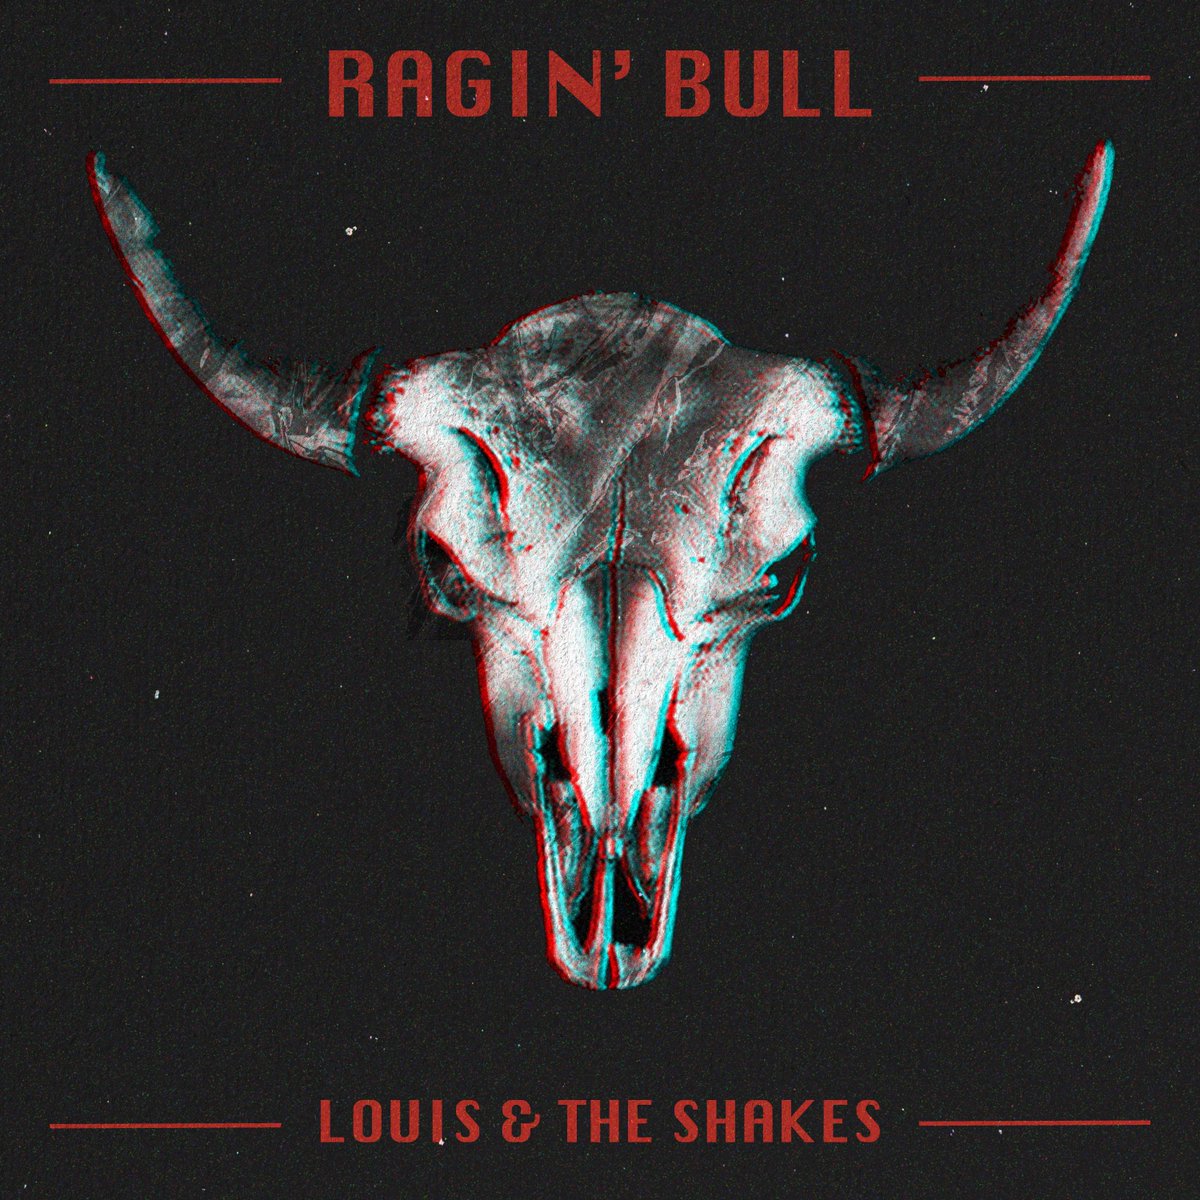 Thought we'd leave you empty handed. NOPE RAGIN' BULL is out THIS FRIDAY! Pre-save it now lnk.to/RAGINBULL #Newmusic #Indierock #altrock